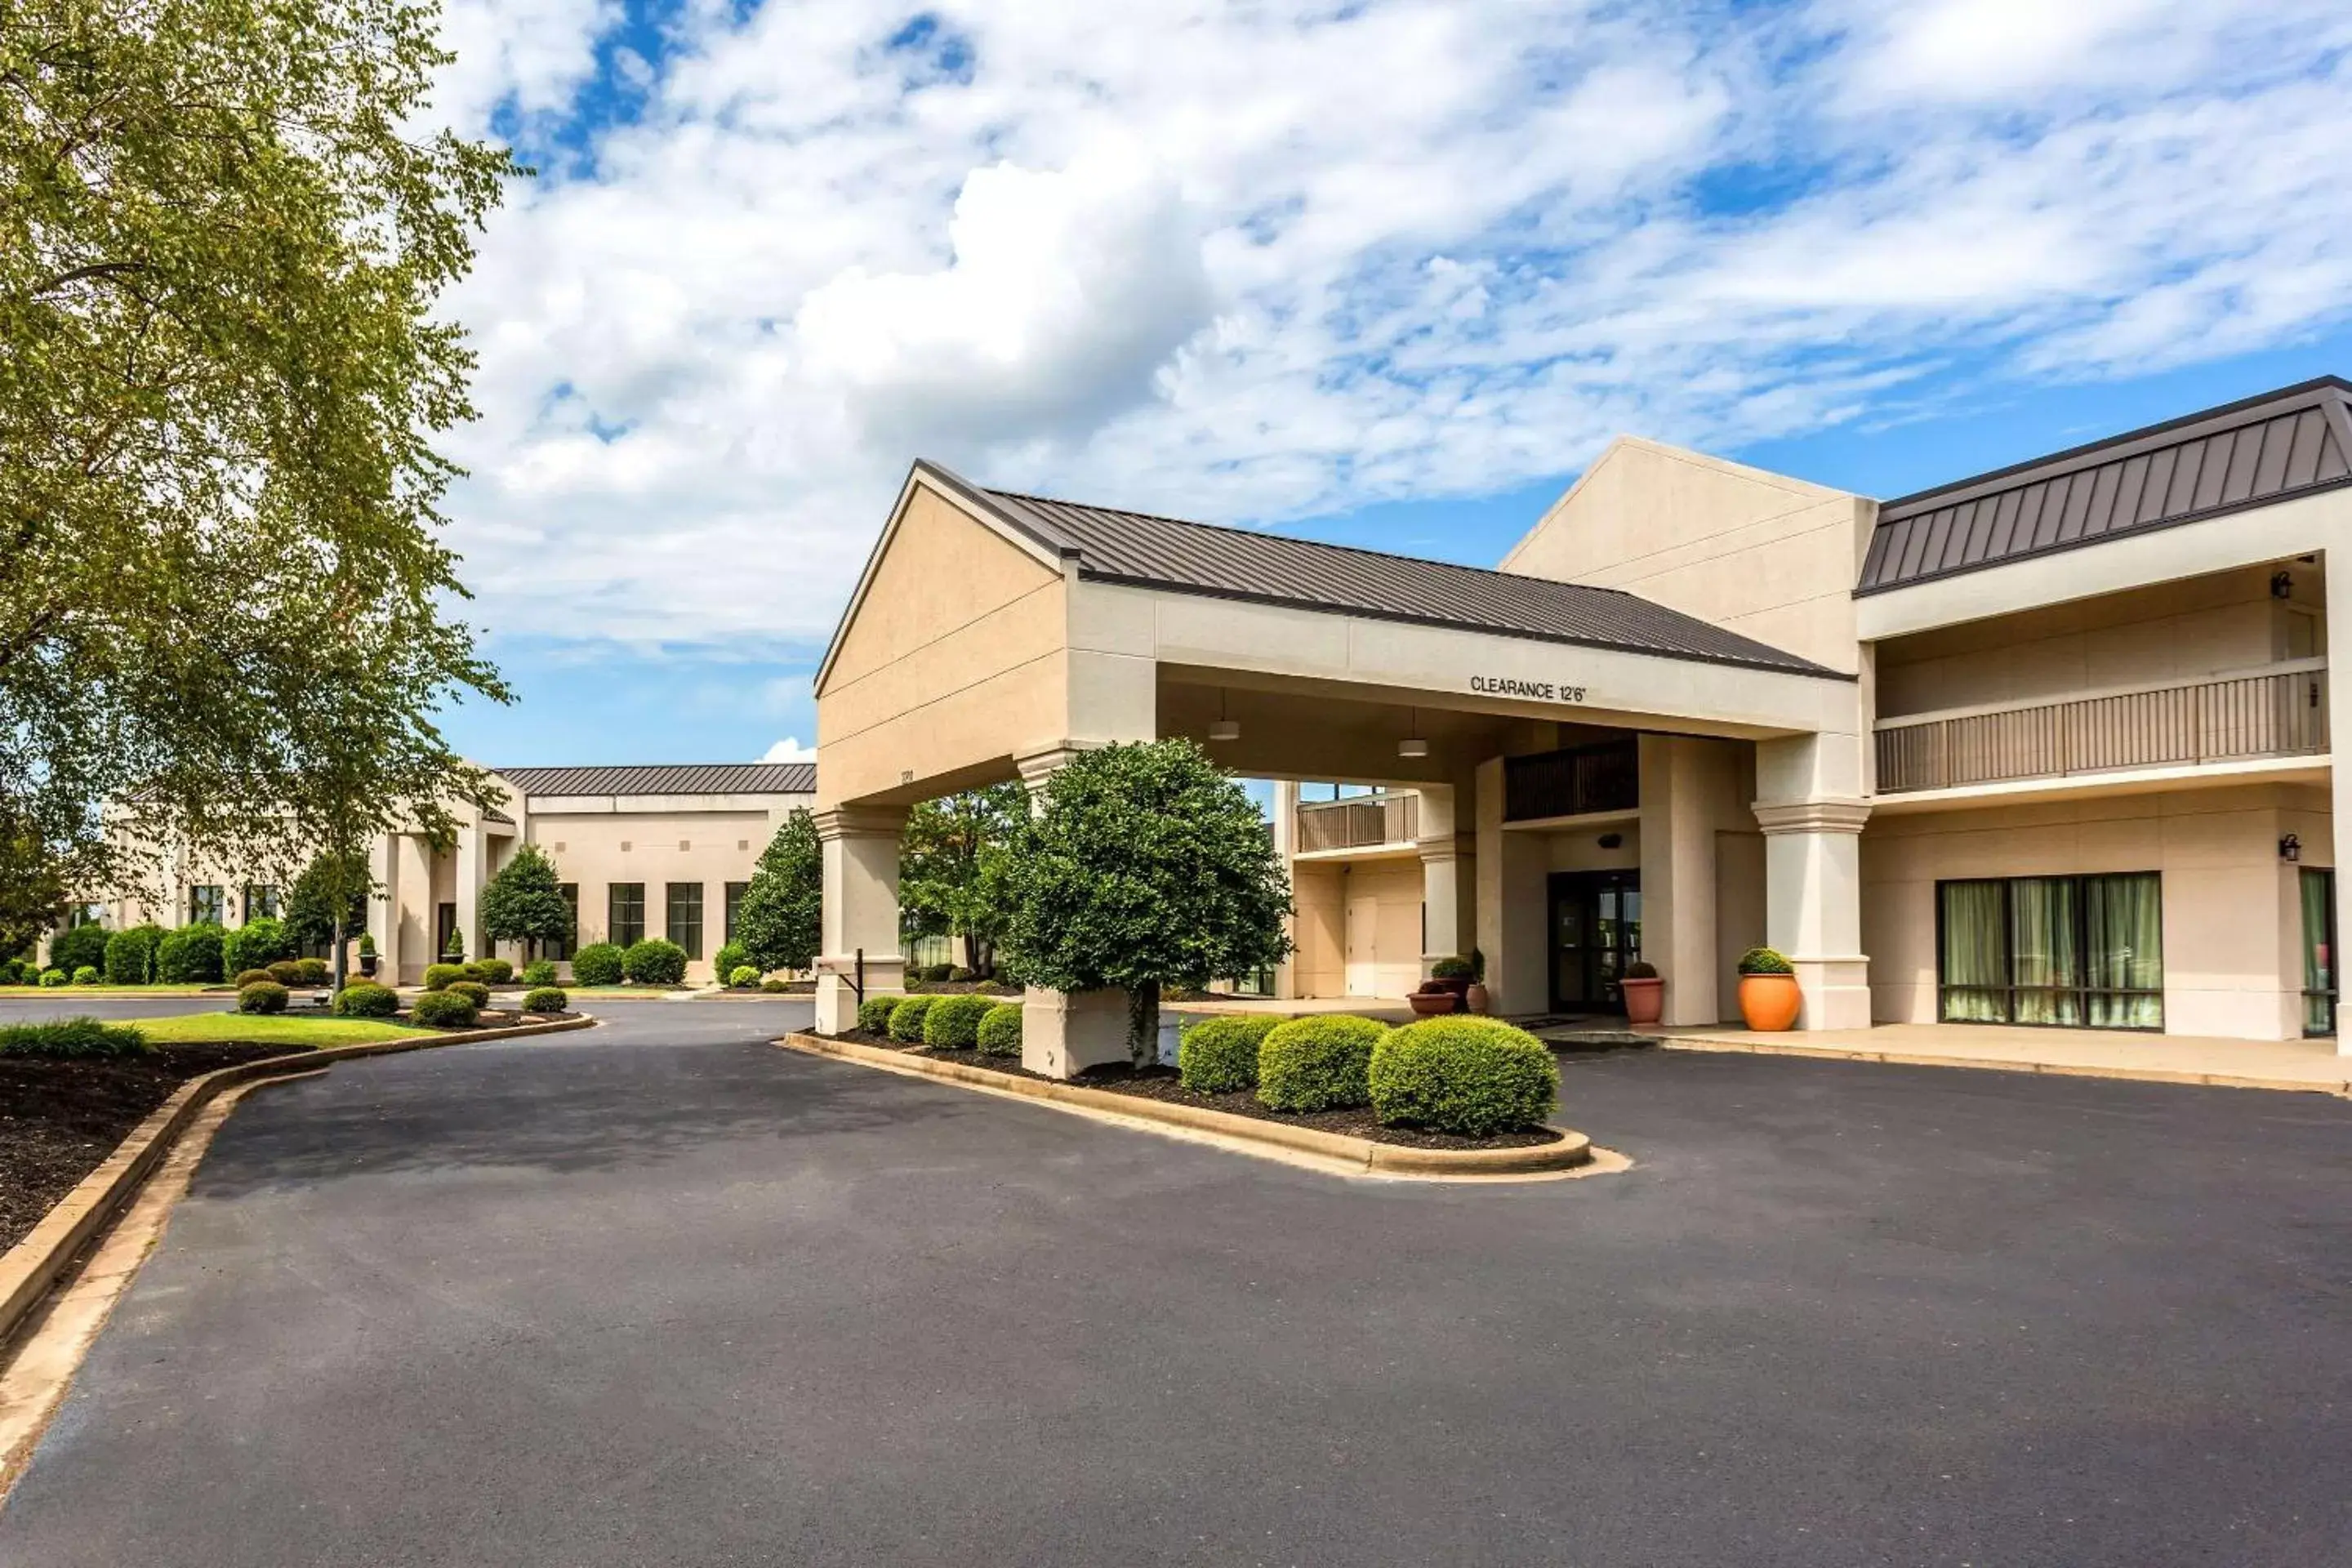 Property building in Quality Inn Union City US 51